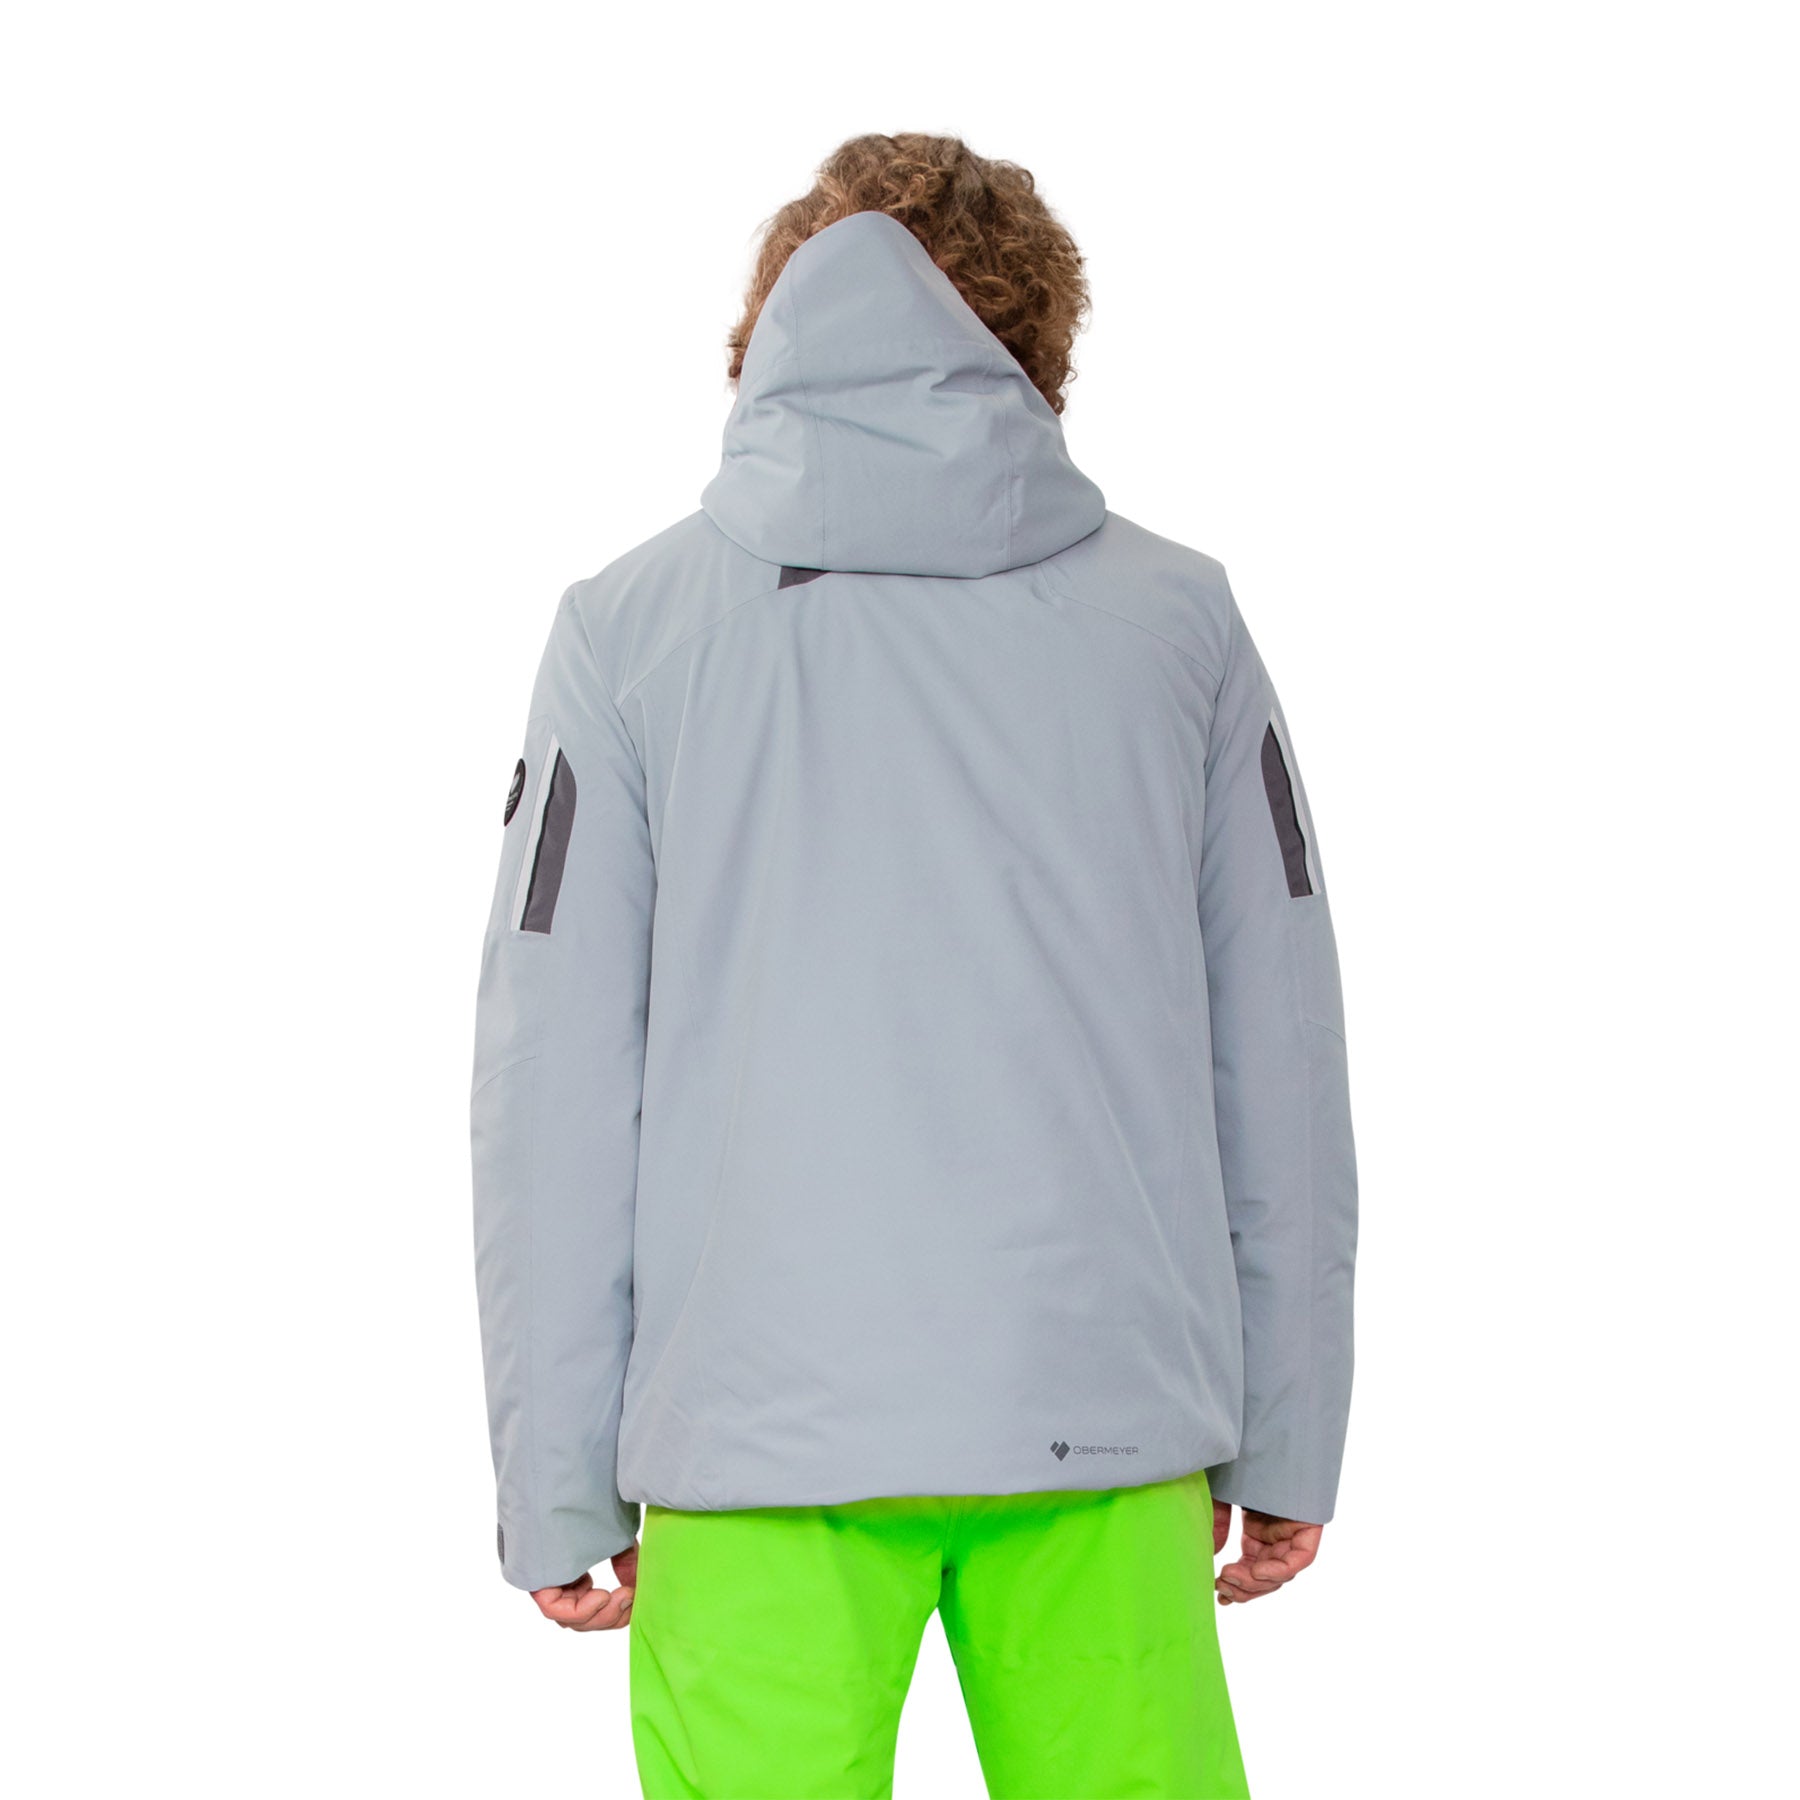 Image features the back of a model wearing the Obermeyer Primo Jacket in shale grey with bright green ski pants.